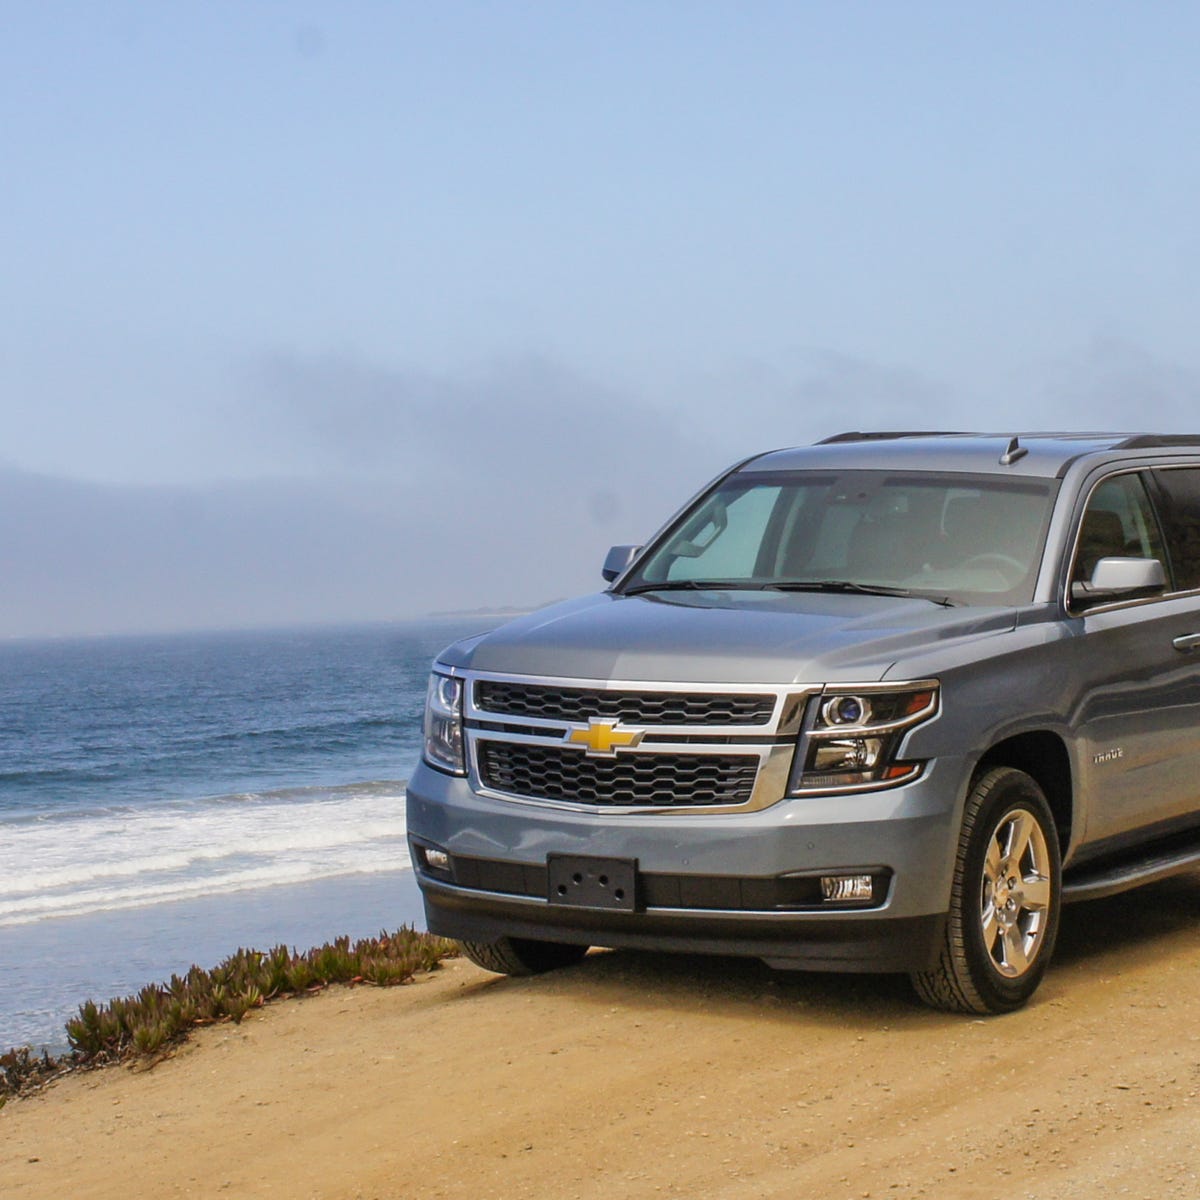 2016 Chevrolet Tahoe review: Chevy Tahoe delivers surprisingly refined  ride, solid towing capability and a dusting of tech - CNET